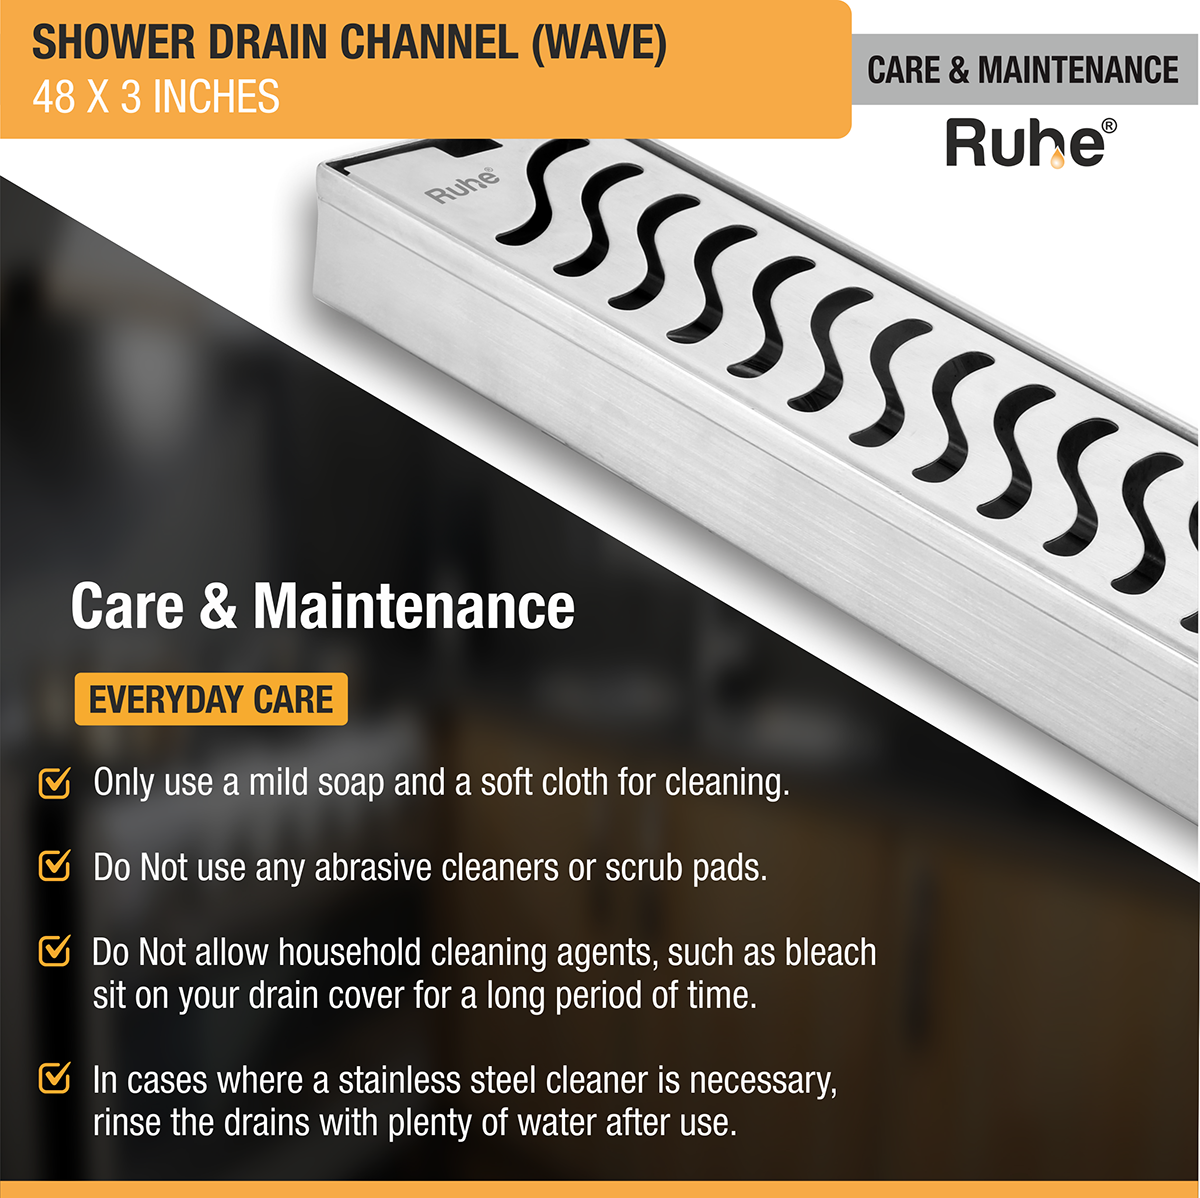 Wave Shower Drain Channel (48 X 3 Inches) with Cockroach Trap (304 Grade) care and maintenance